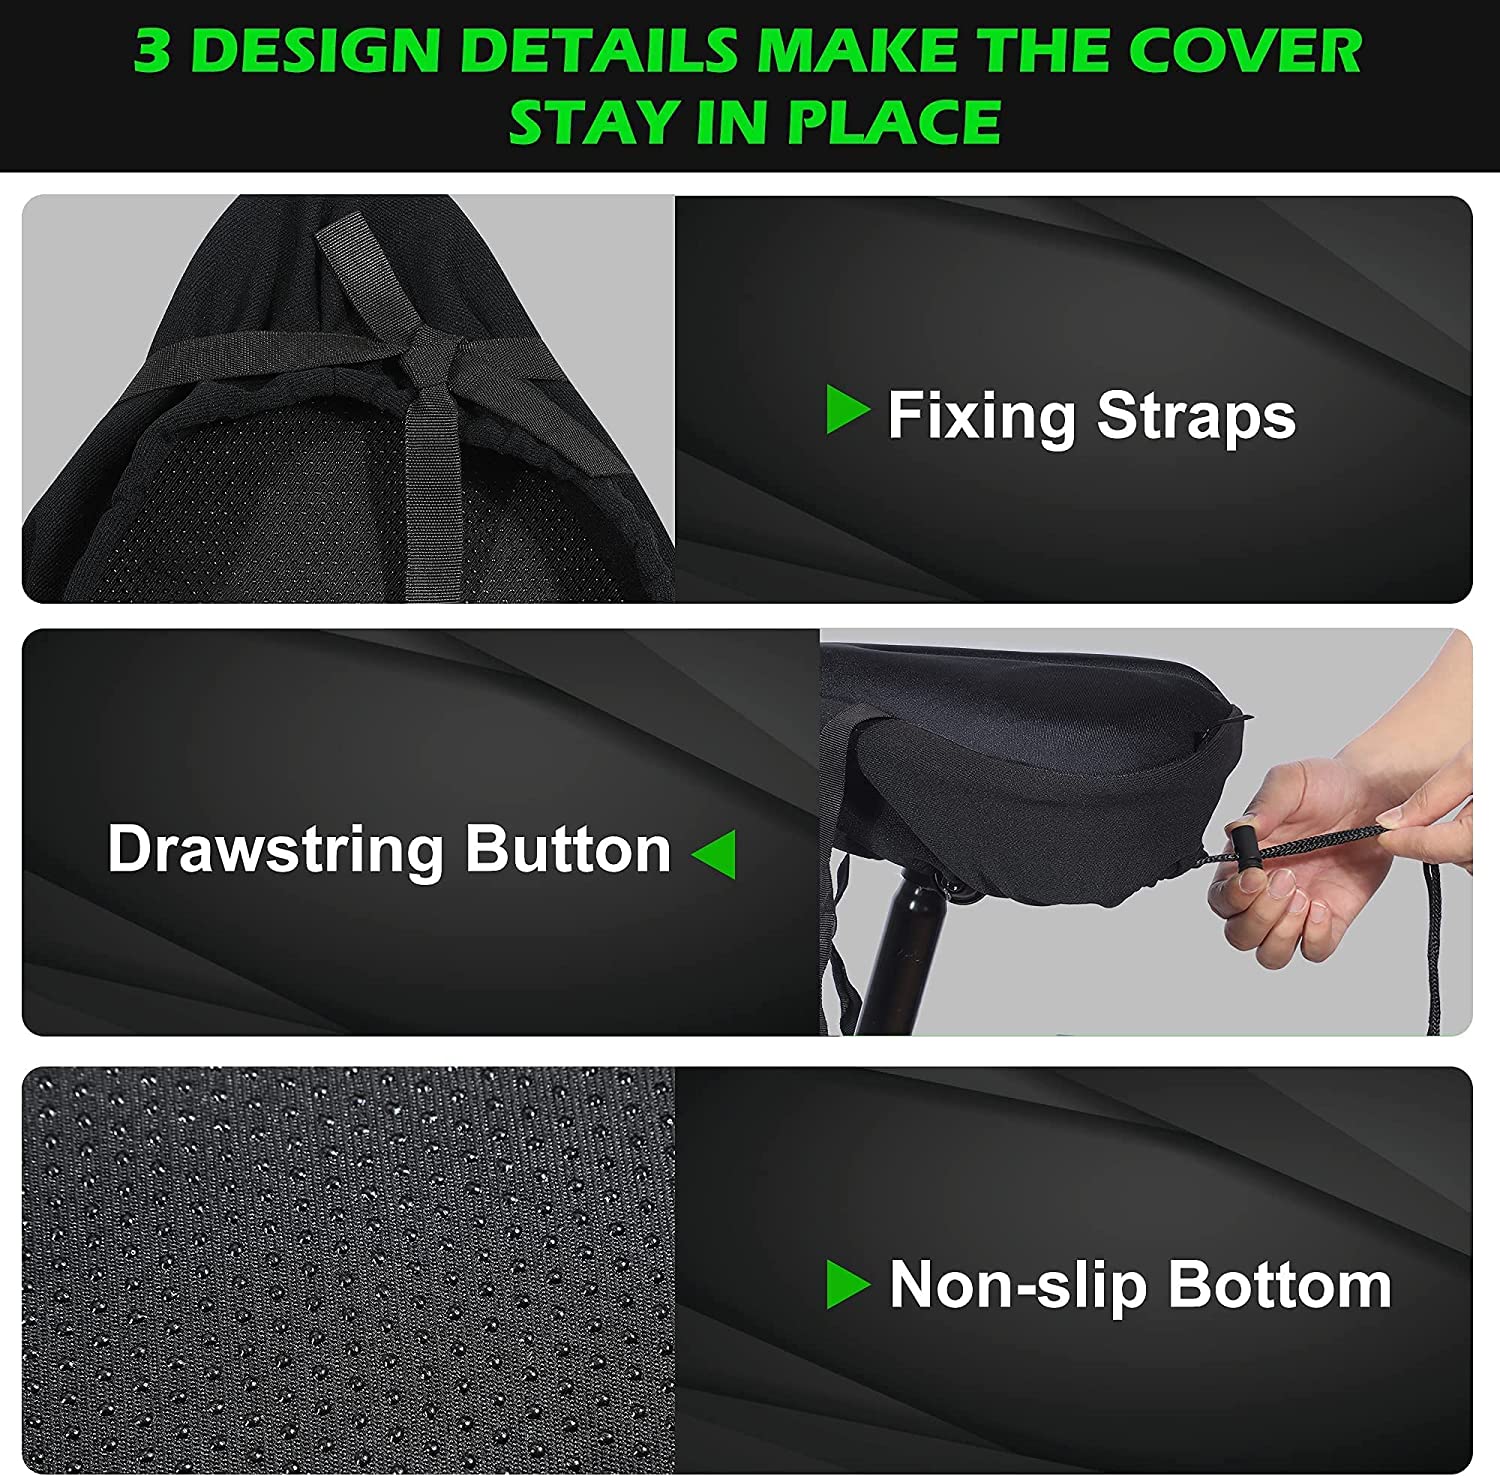 81A5DUlwoHL. AC SL1500  - Zacro Bike Seat Cushion - Gel Padded Wide Adjustable Cover for Men & Womens Comfort, Compatible with Peloton, Stationary Exercise or Cruiser Bicycle Seats, 11.4in X 10.4in, Water&Dust Resistant Cover